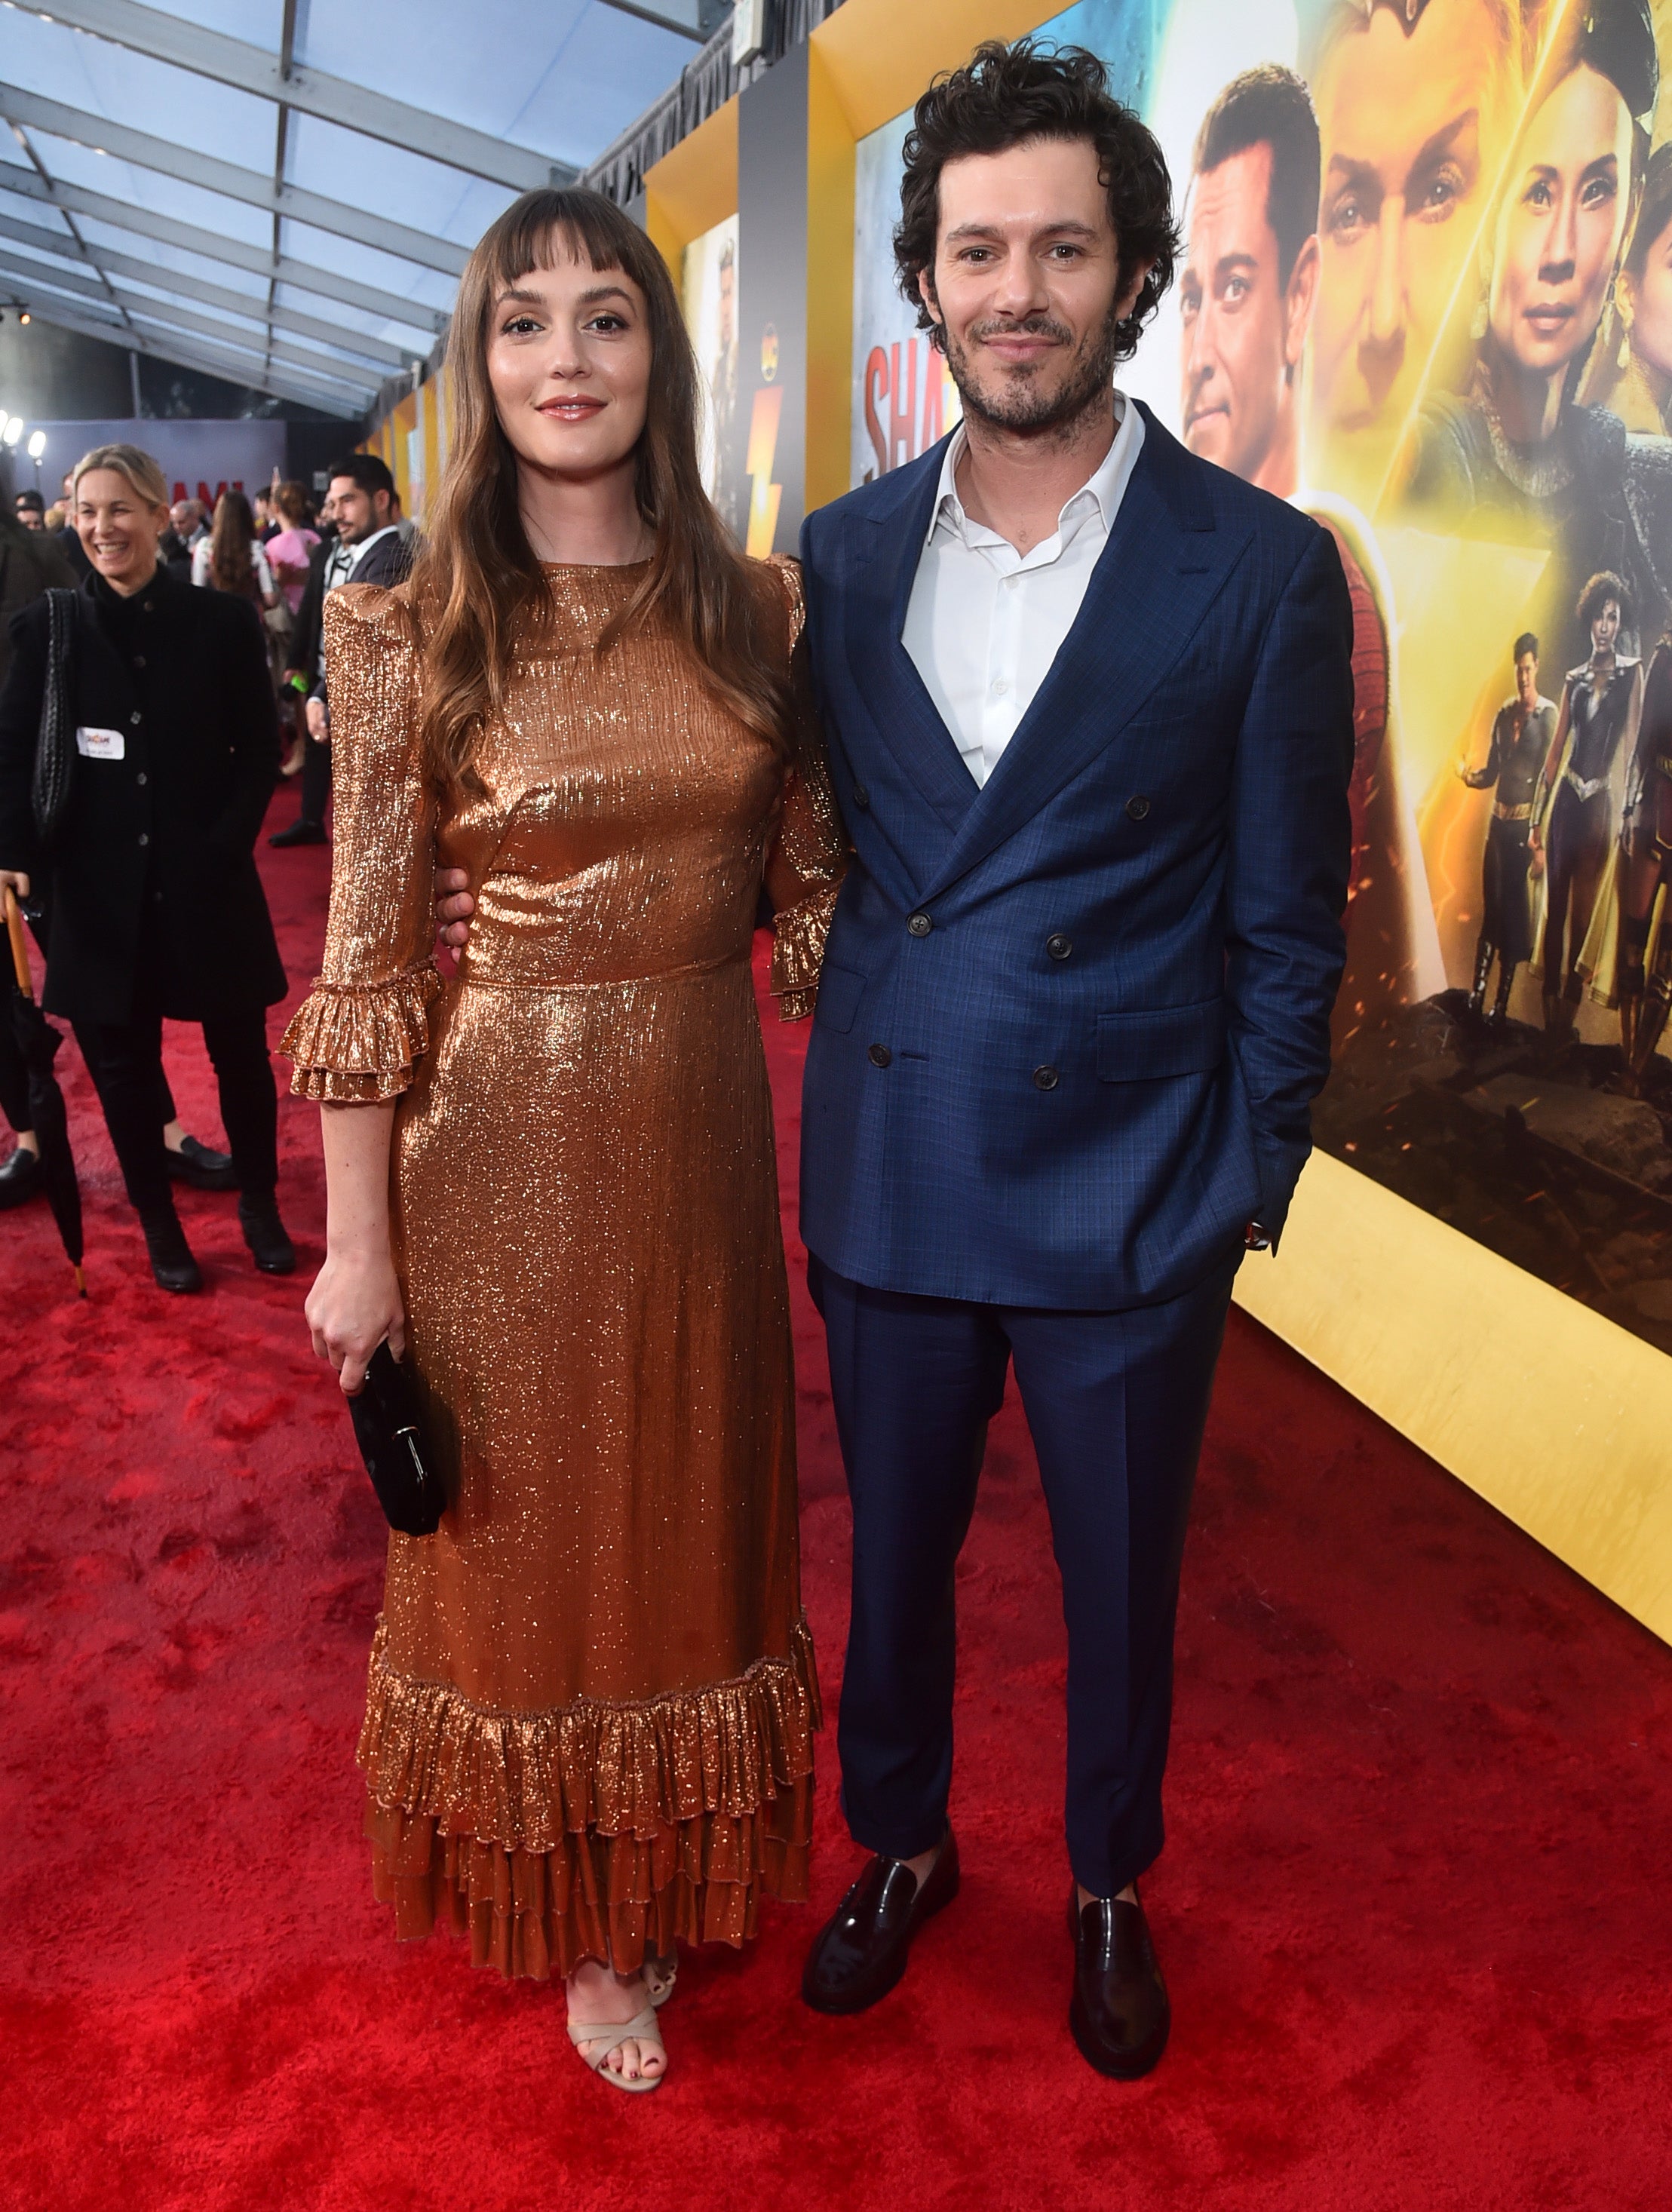 Adam Brody and Leighton Meester on the red carpet